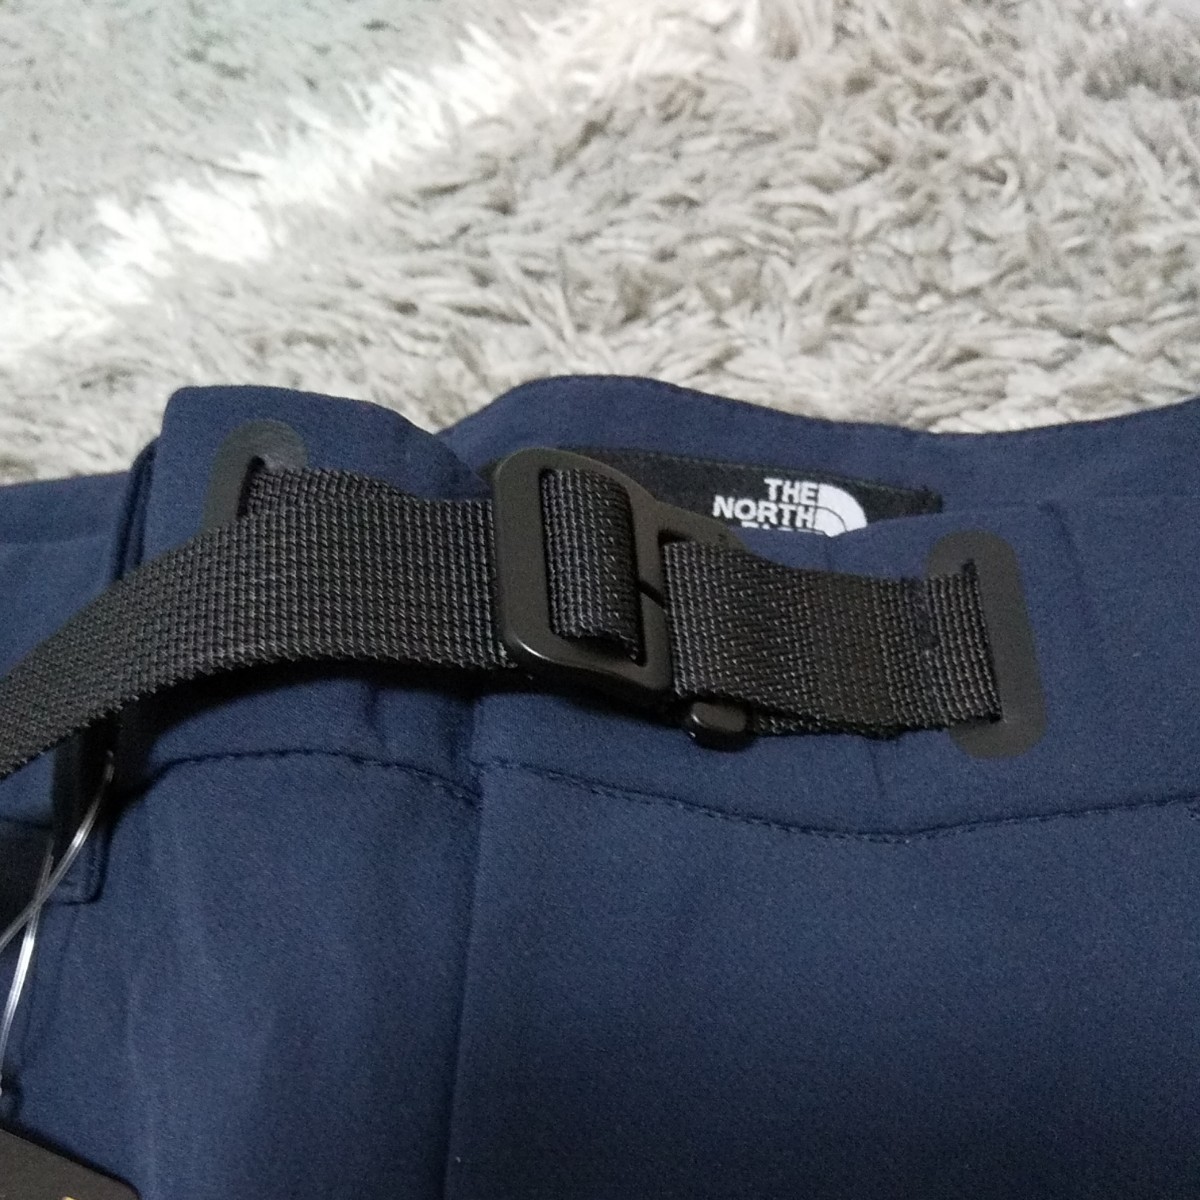 THE NORTH FACE ELK PANT